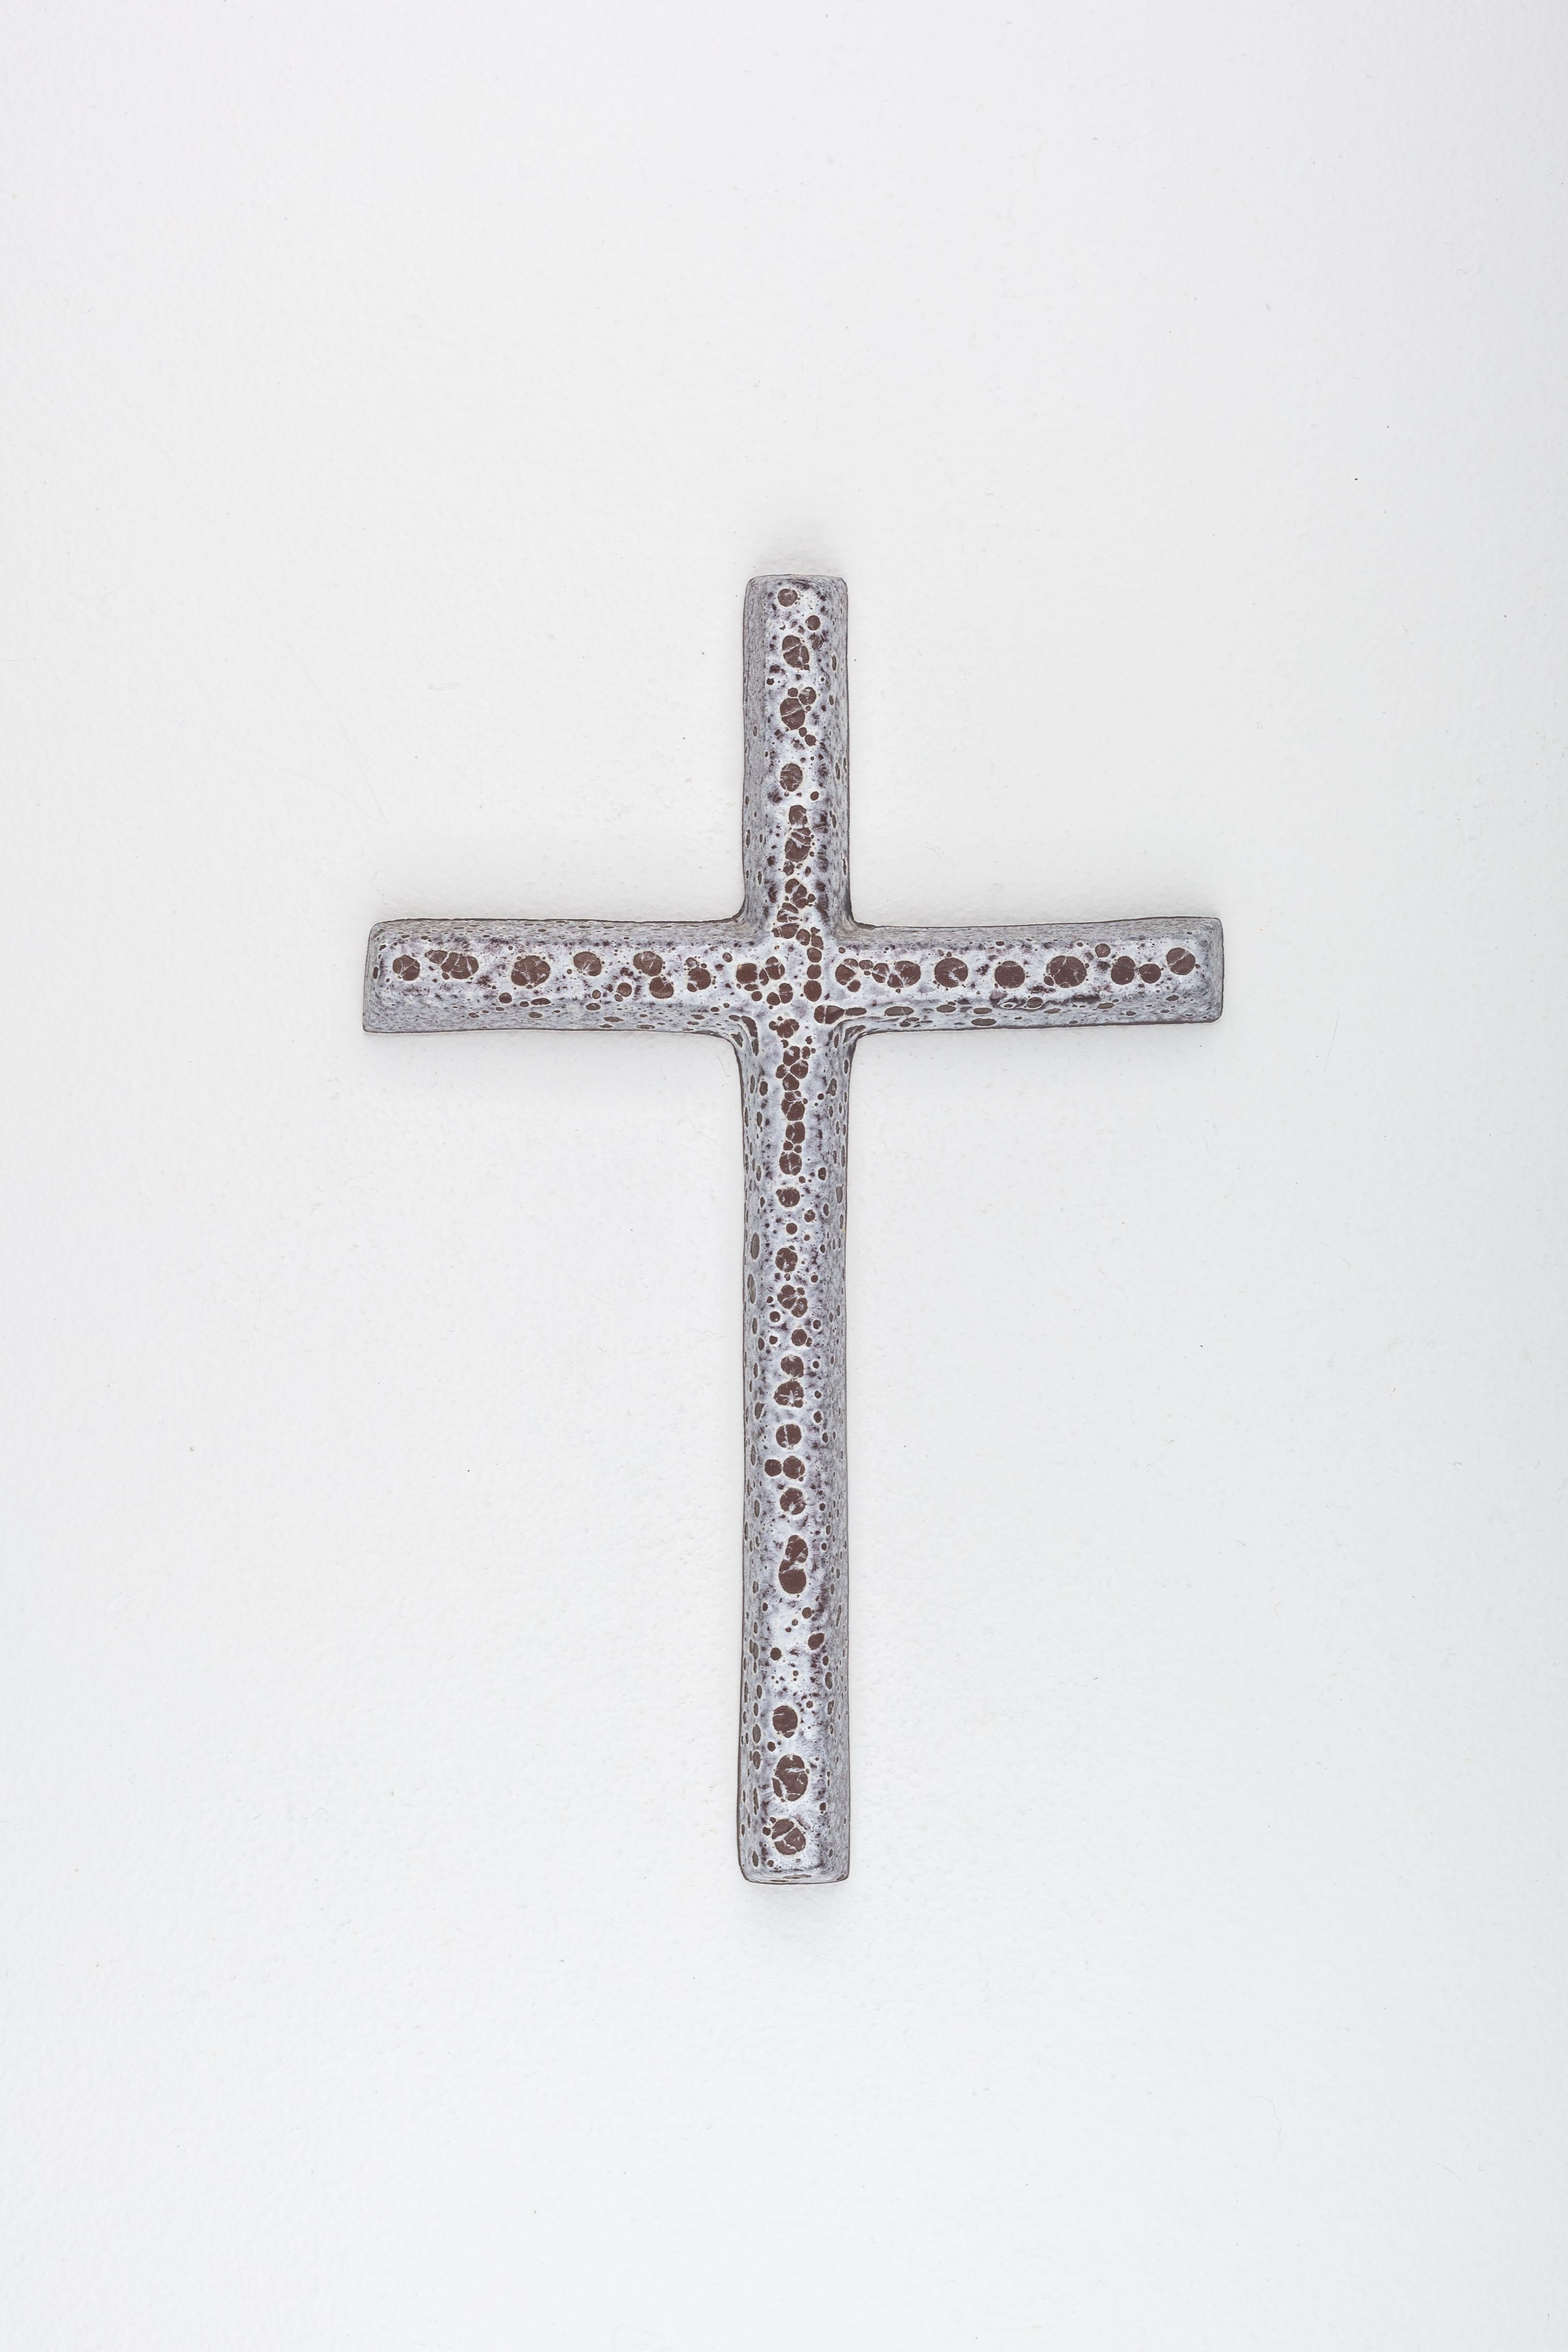 This mid-century wall cross embodies the distinctive European design ethos of the 1950s, masterfully handcrafted by a studio pottery artist. The piece features a 